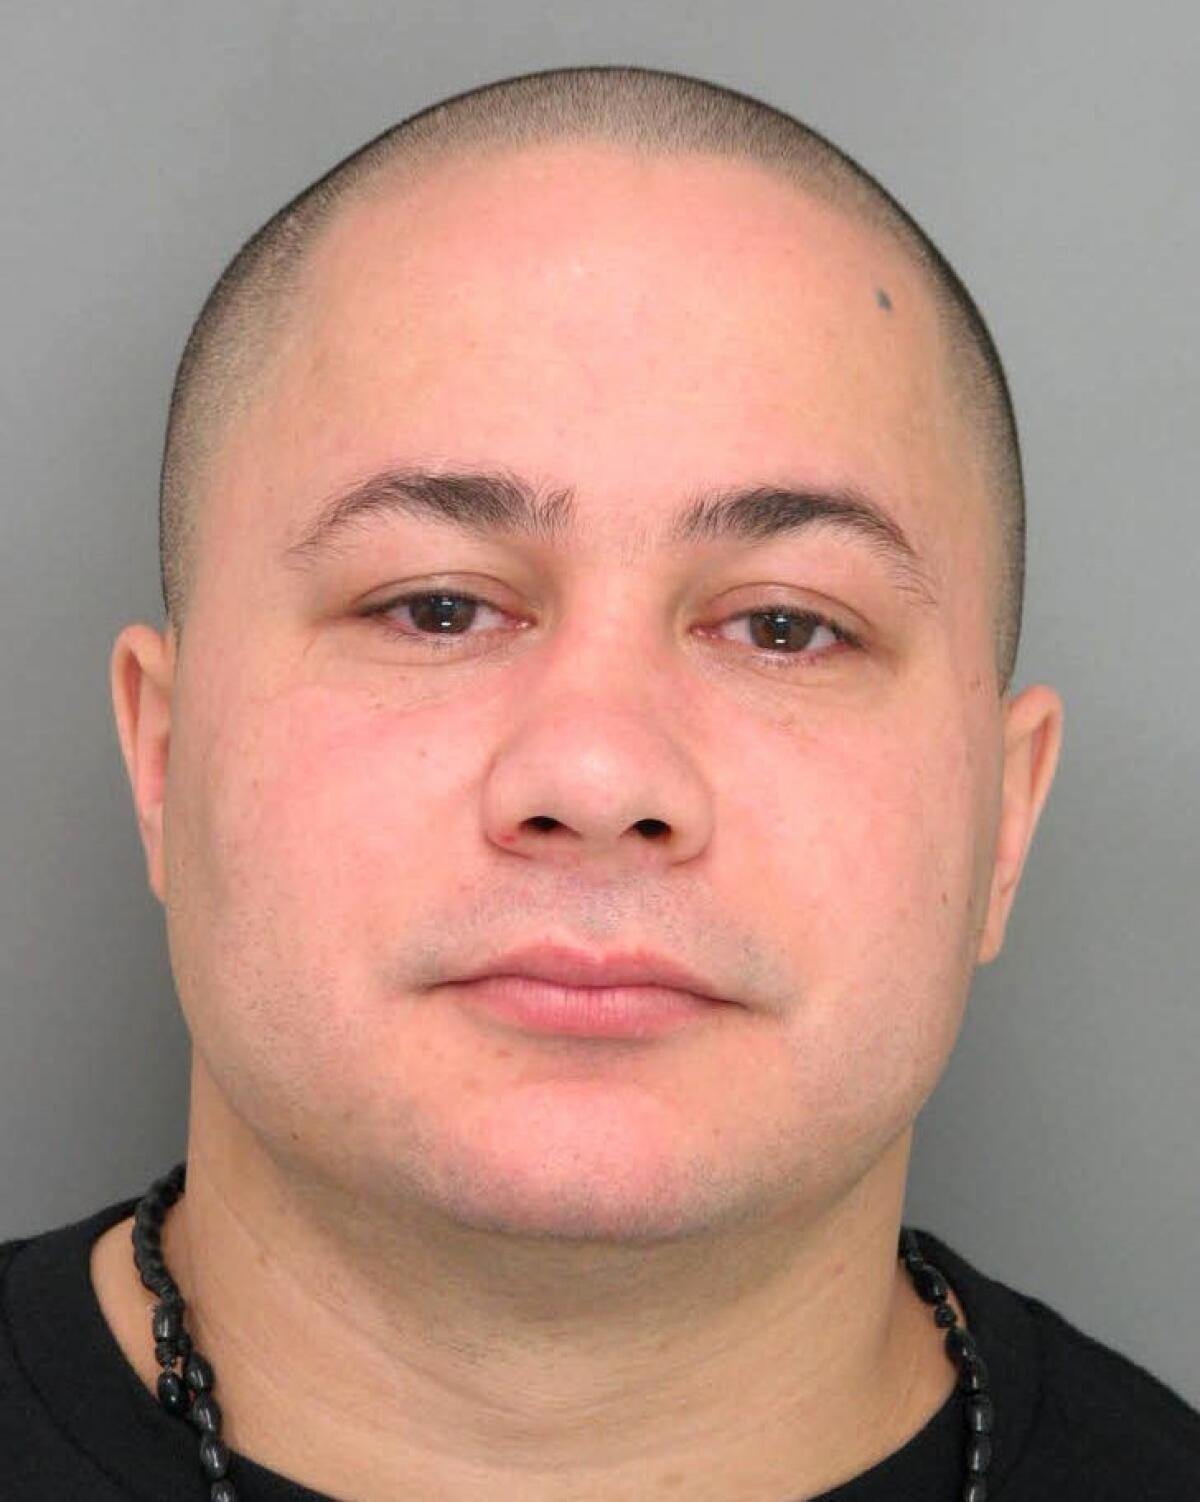 The FBI released a photo of Luis Alomar, wanted for at least 20 robberies along the Eastern Seaboard.